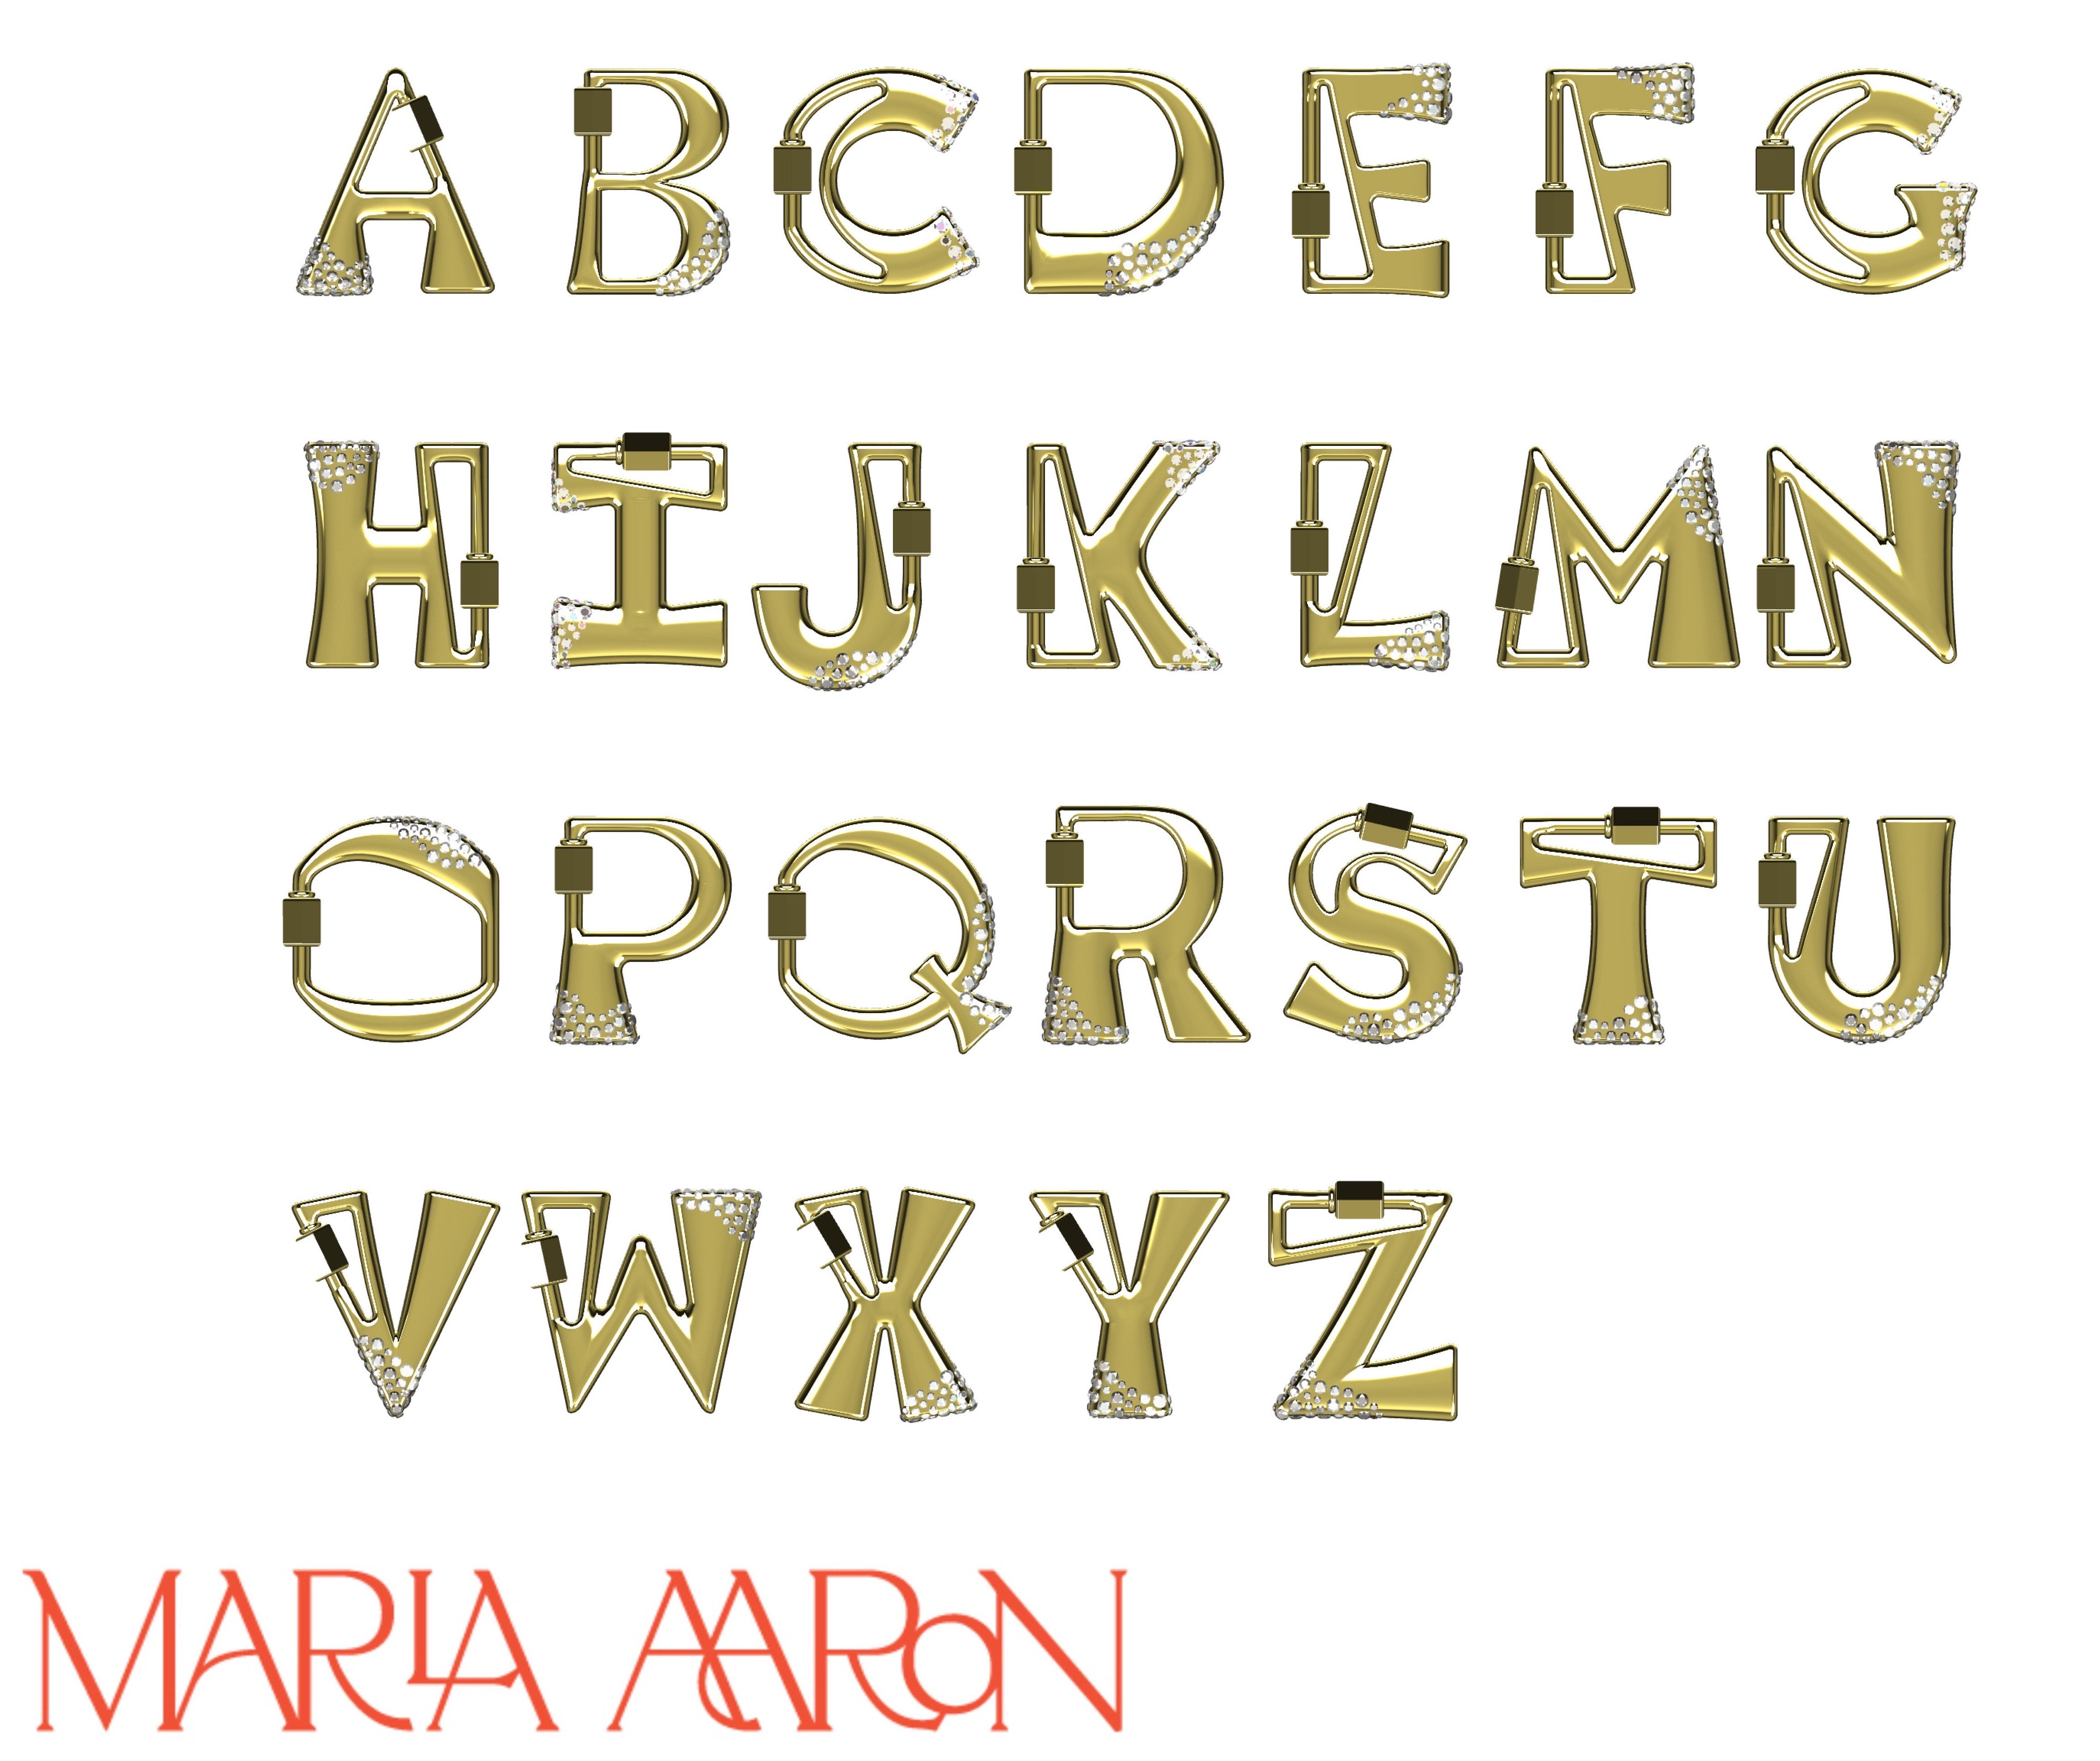 Gold locks of every letter of the alphabet including N charm against white backdrop with Marla Aaron logo in bottom left corner